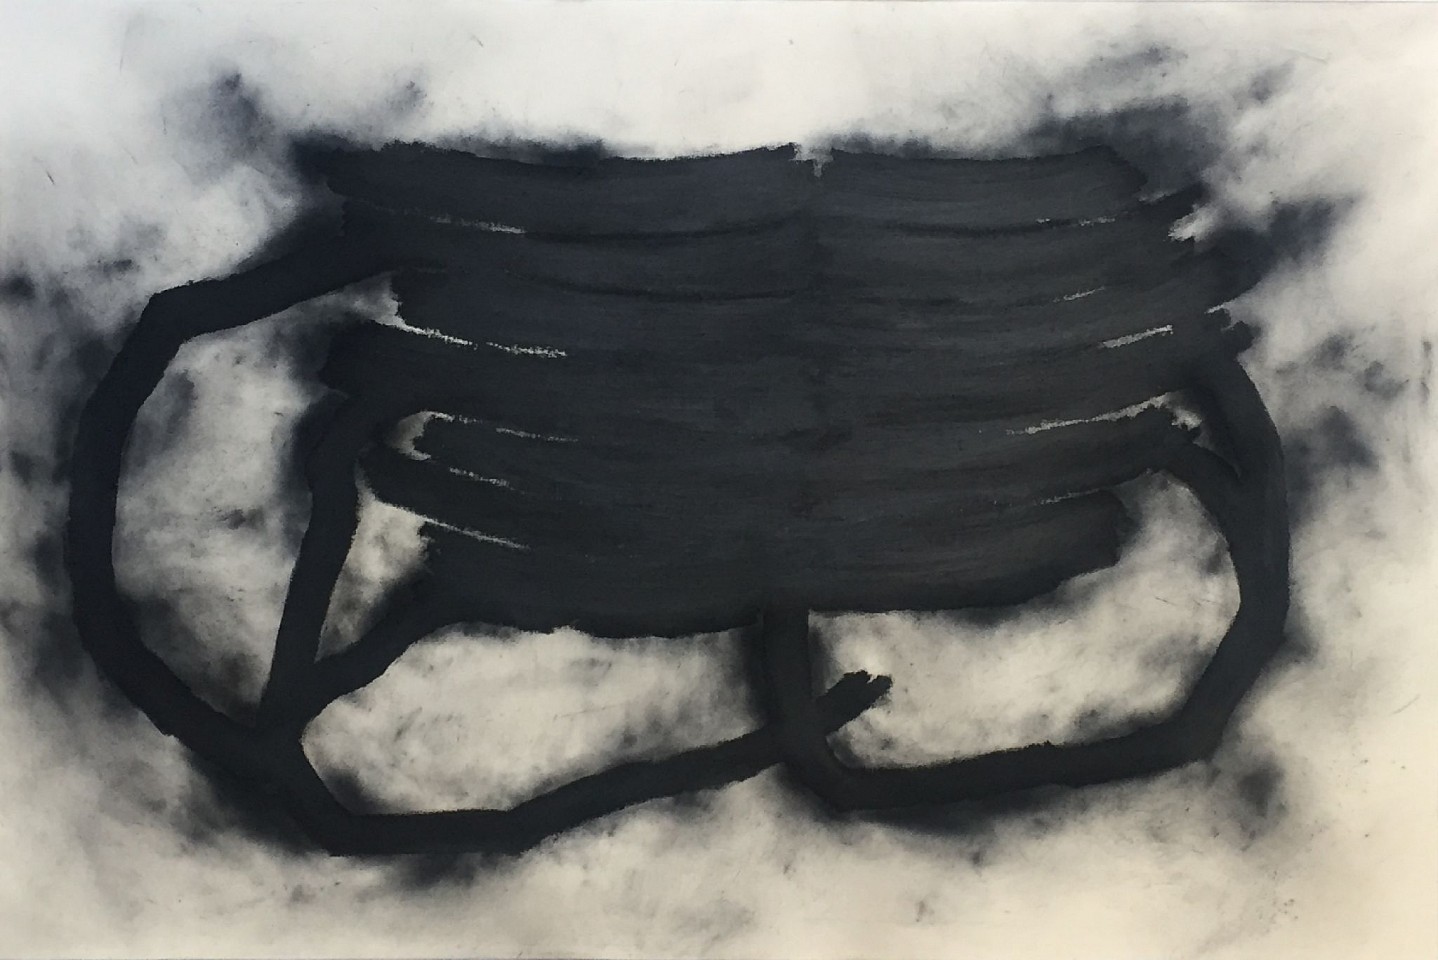 UDO NÖGER, Twenty two hours of dreams No49, 2018
charcoal on canvas, 48 x 72 in. (121.9 x 182.9 cm)
NU-C-0185